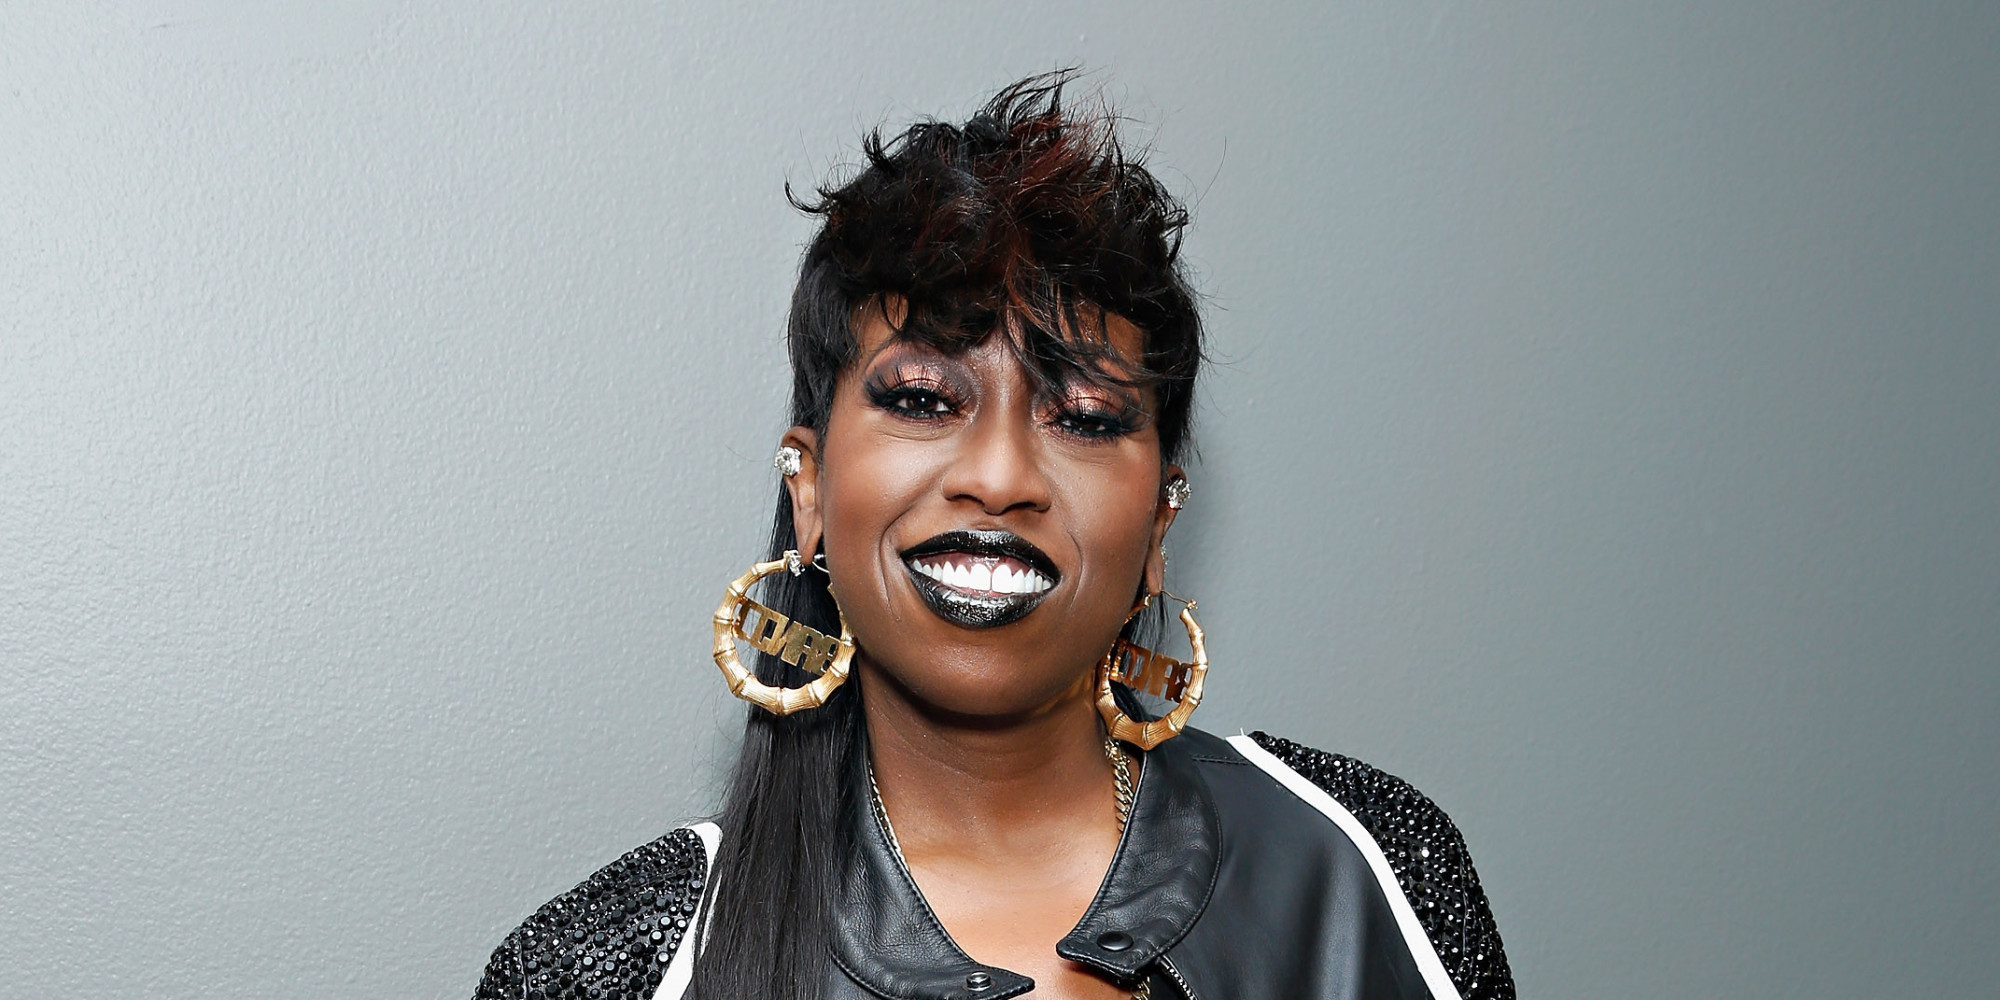 NEW YORK, NY - AUGUST 14: Recording artist Missy Elliott poses backstage at BET's '106 and Park' at BET Studios on August 14, 2013 in New York City. (Photo by Cindy Ord/BET/Getty Images for BET)